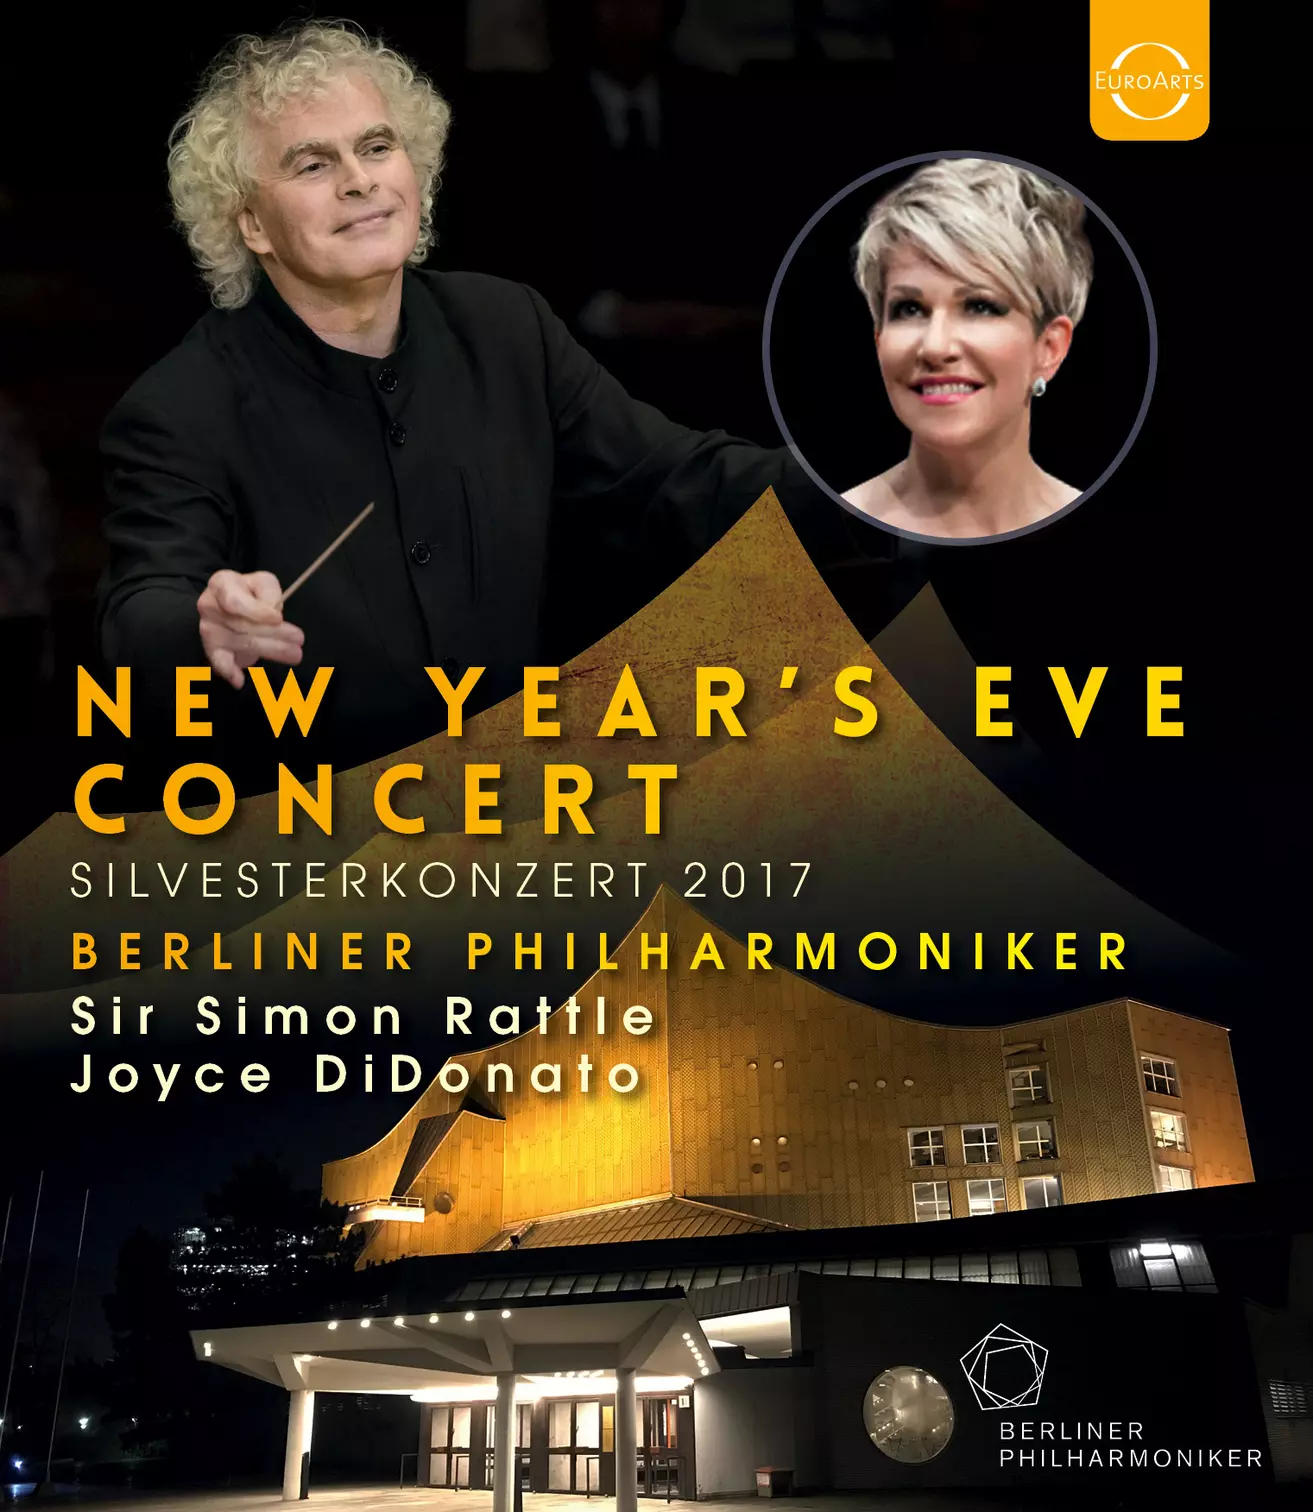 New Year’s Eve Concert 2017